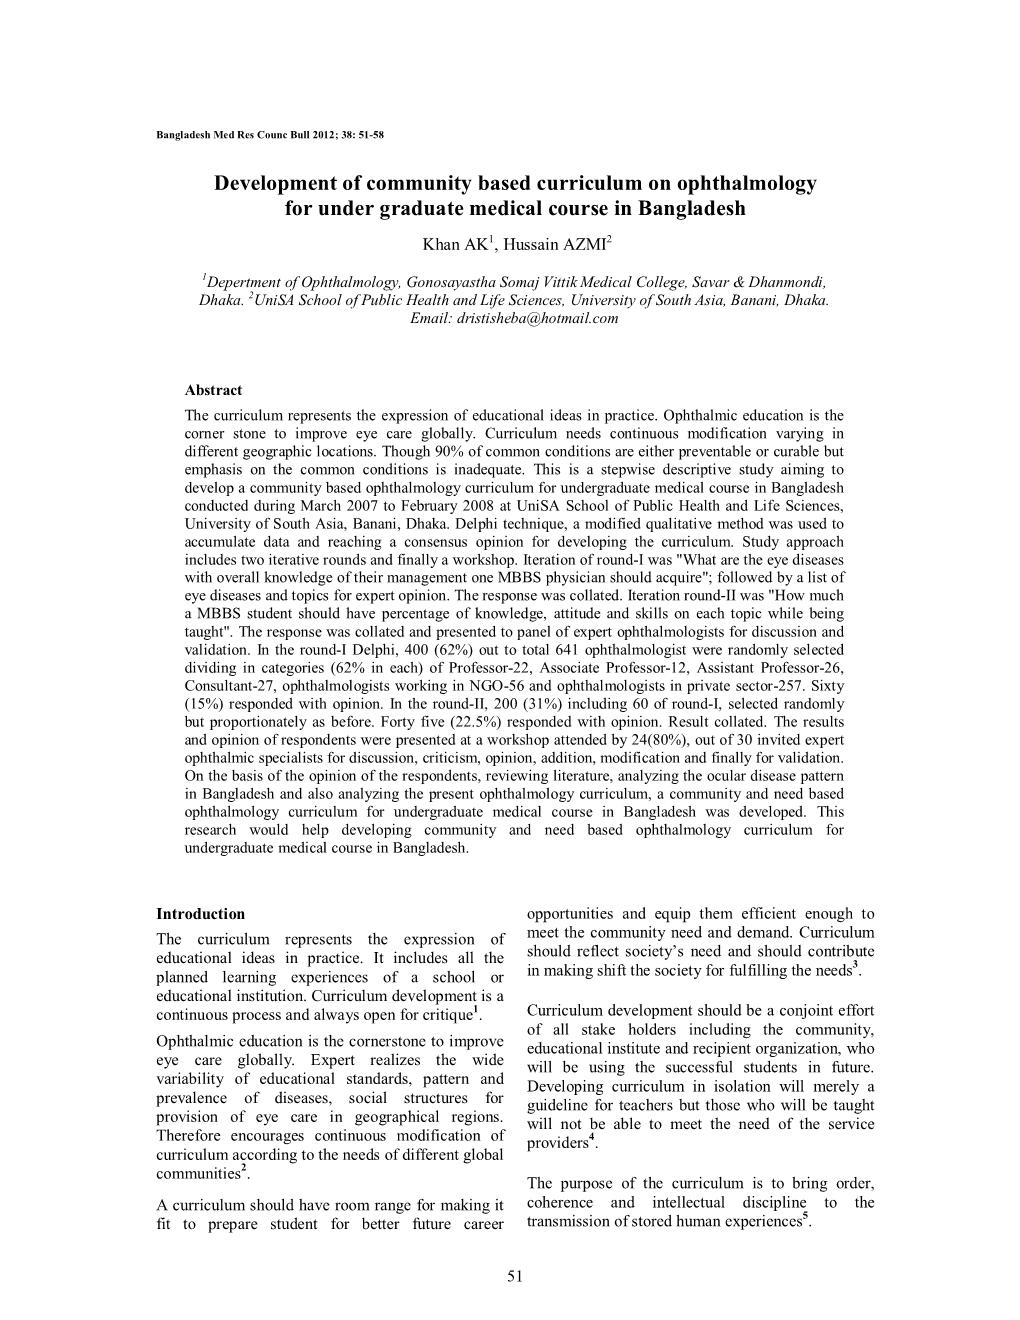 Development of Community Based Curriculum on Ophthalmology for Under Graduate Medical Course in Bangladesh